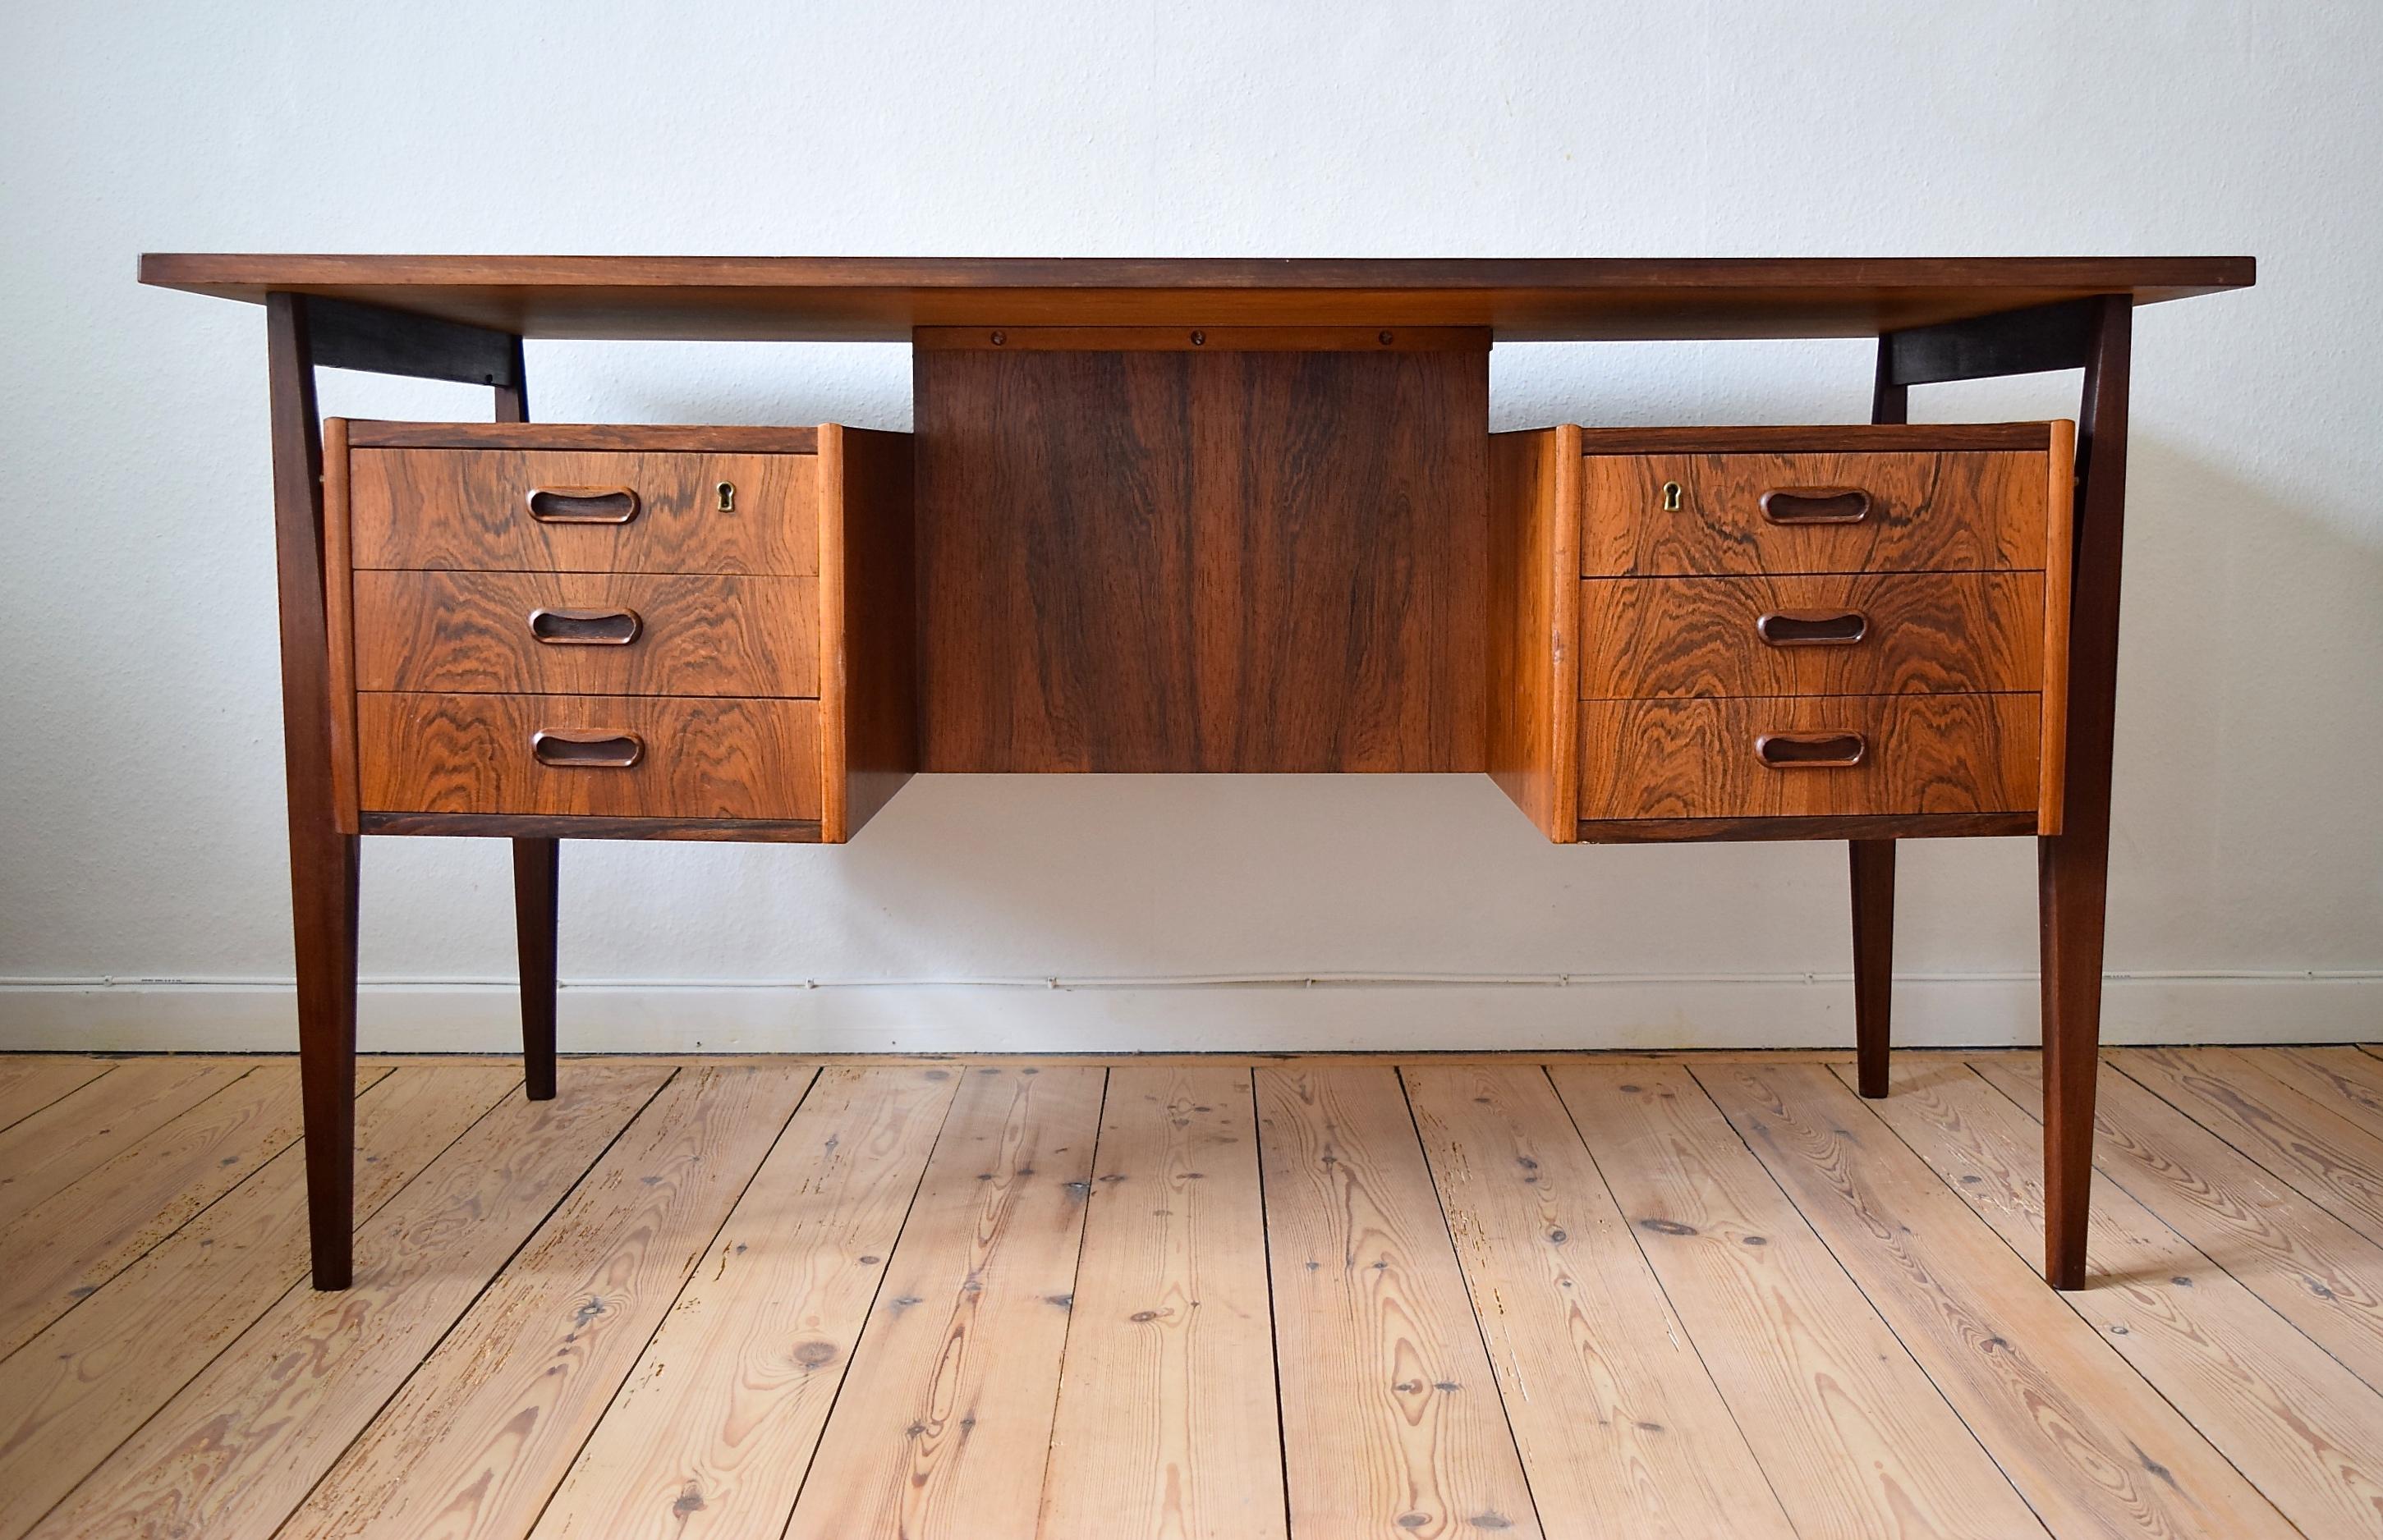 - Rosewood 'floating top' desk manufactured in Denmark in the 1960s
- Desk features six drawers on the front, two lockable
- Has a full-length shelf section on the rear side
- Top shows a strong rosewood grain pattern throughout
- Design of the